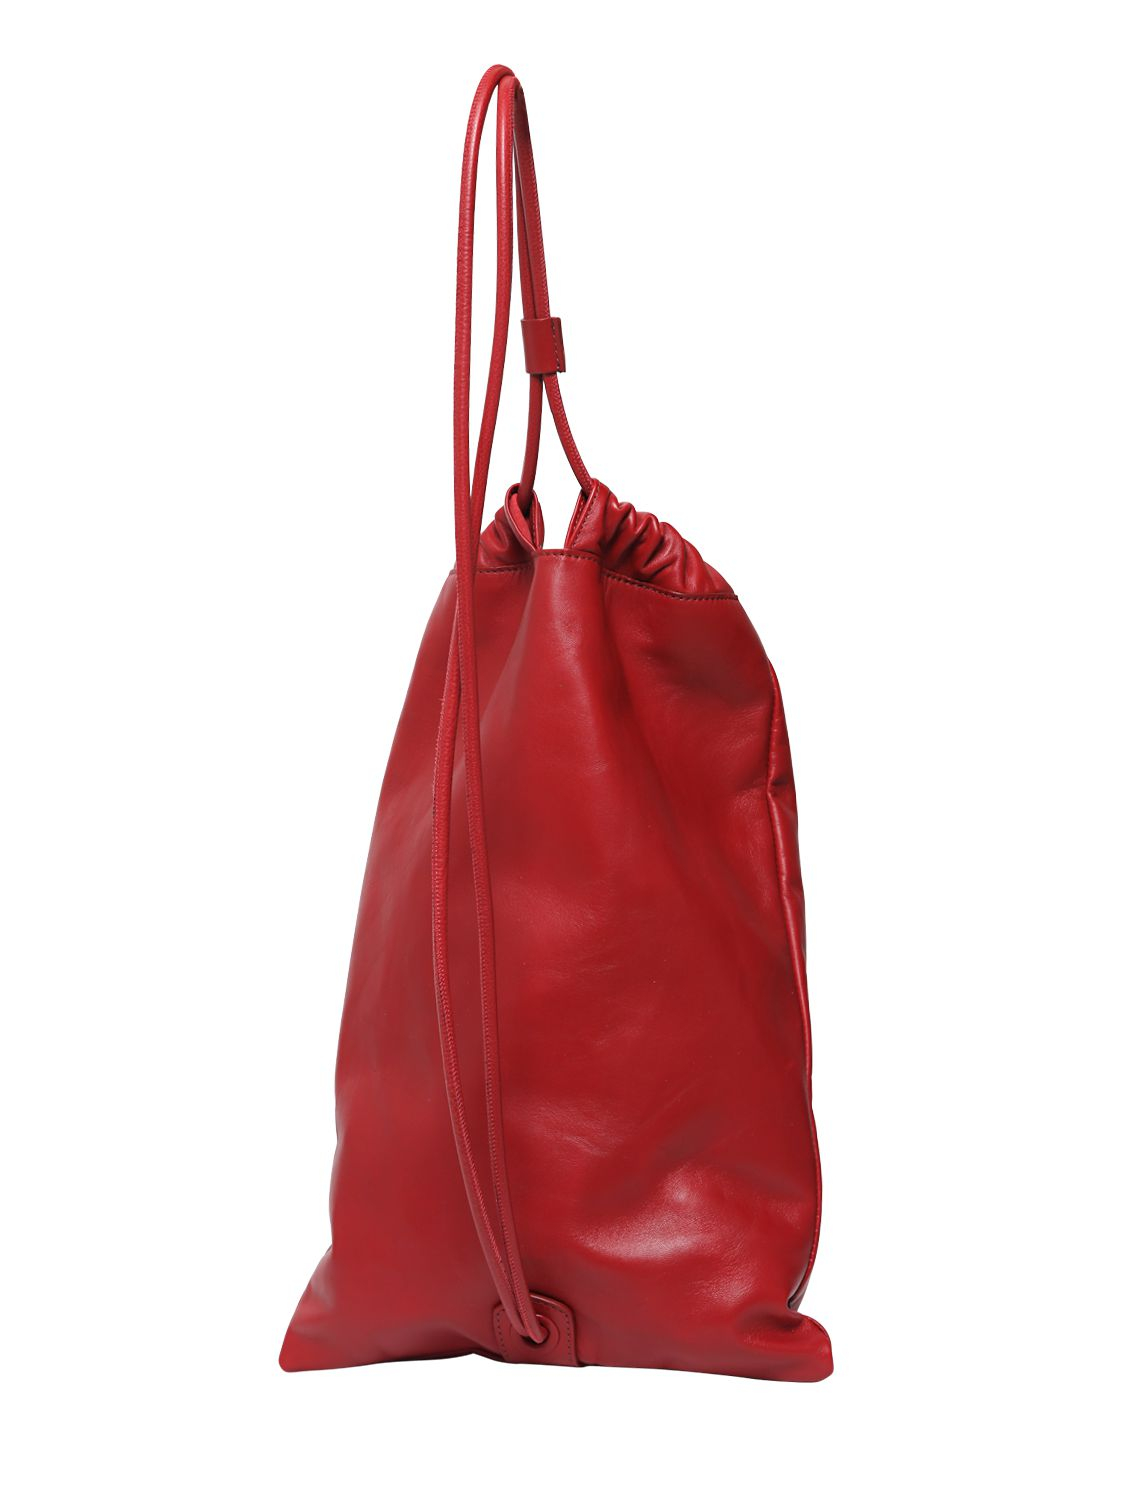 Lyst - Burberry Prorsum Leather Duffle Bag in Red for Men